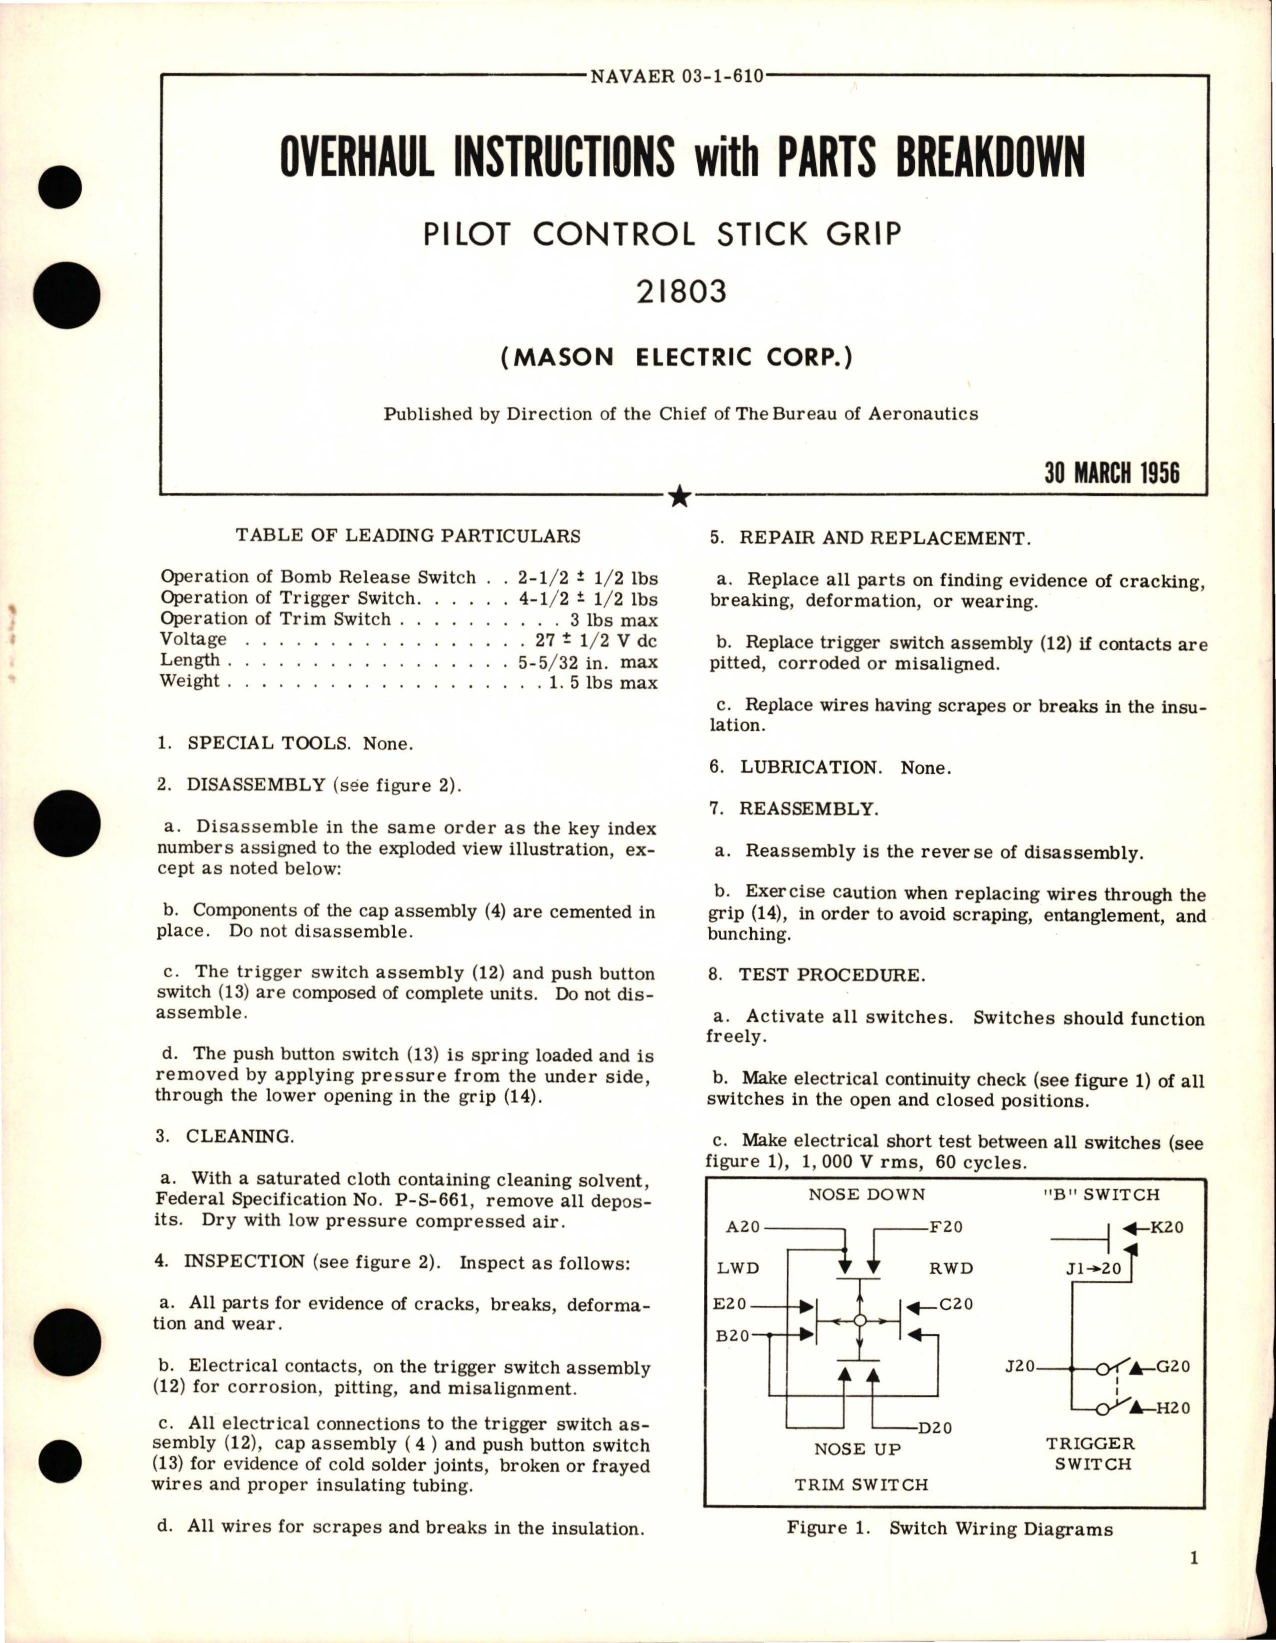 Sample page 1 from AirCorps Library document: Overhaul Instructions with Parts Breakdown for Pilot Control Stick Grip - 21803 